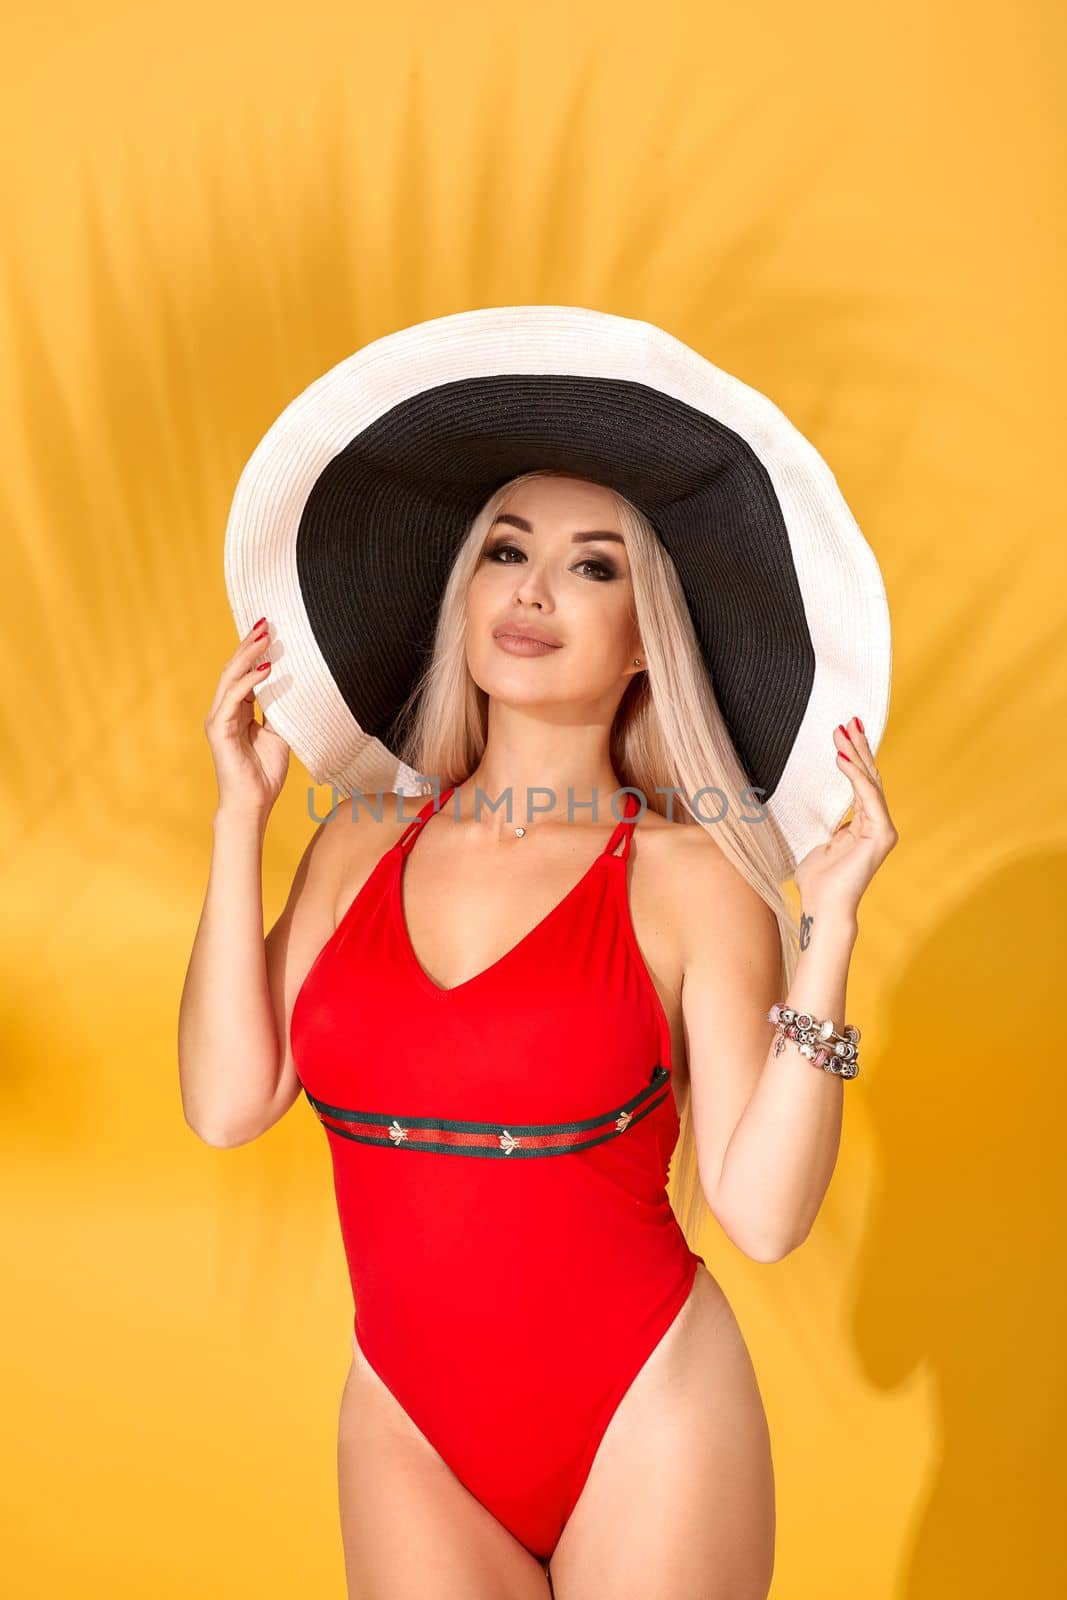 Young sexy blonde woman with long straight hair posing in studio. Perfect gorgeous pale body, red swimsuit or bikini. Big black-and-white hat